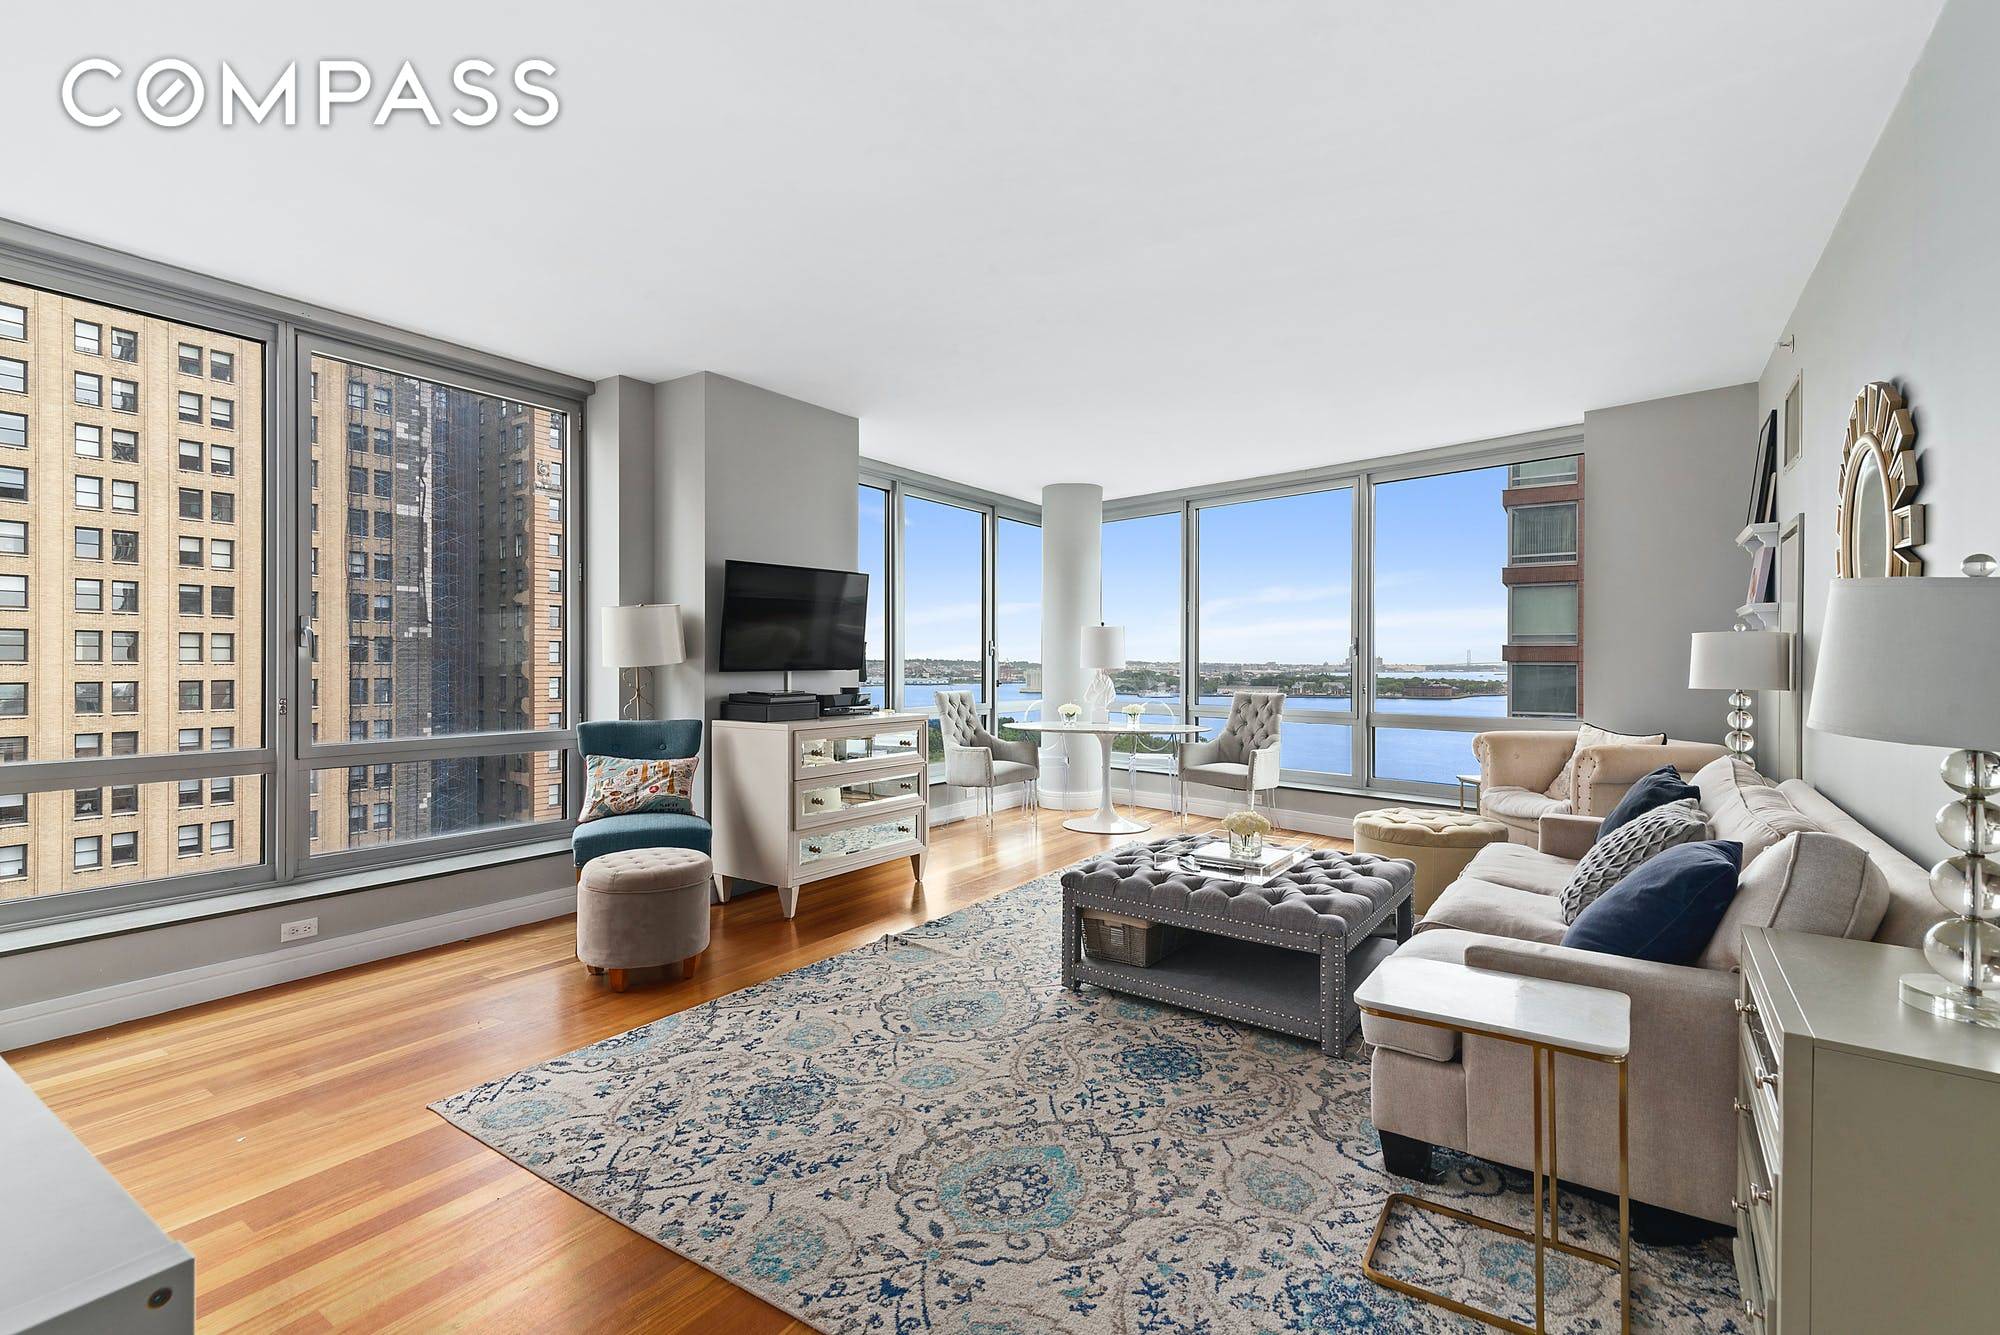 Postcard Views, superb quality, and tremendous value, all inside 16E at 30 West Street in Battery Park City.